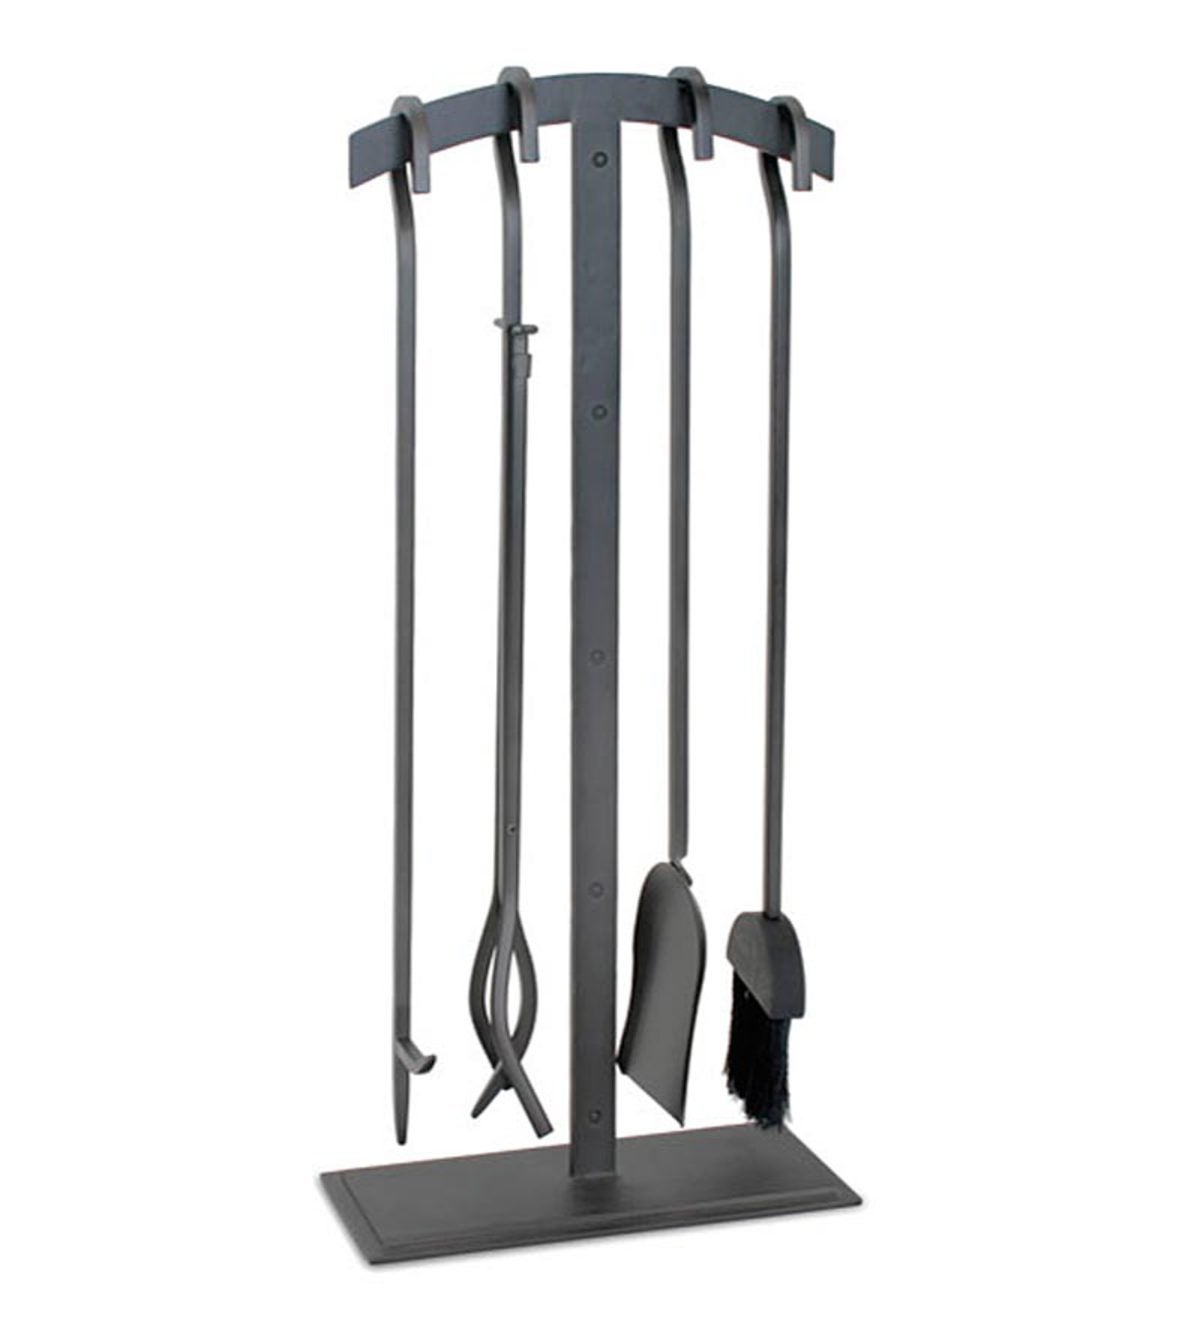 Shadow Iron 5-Piece Fireplace Tool Set in Natural Iron Finish